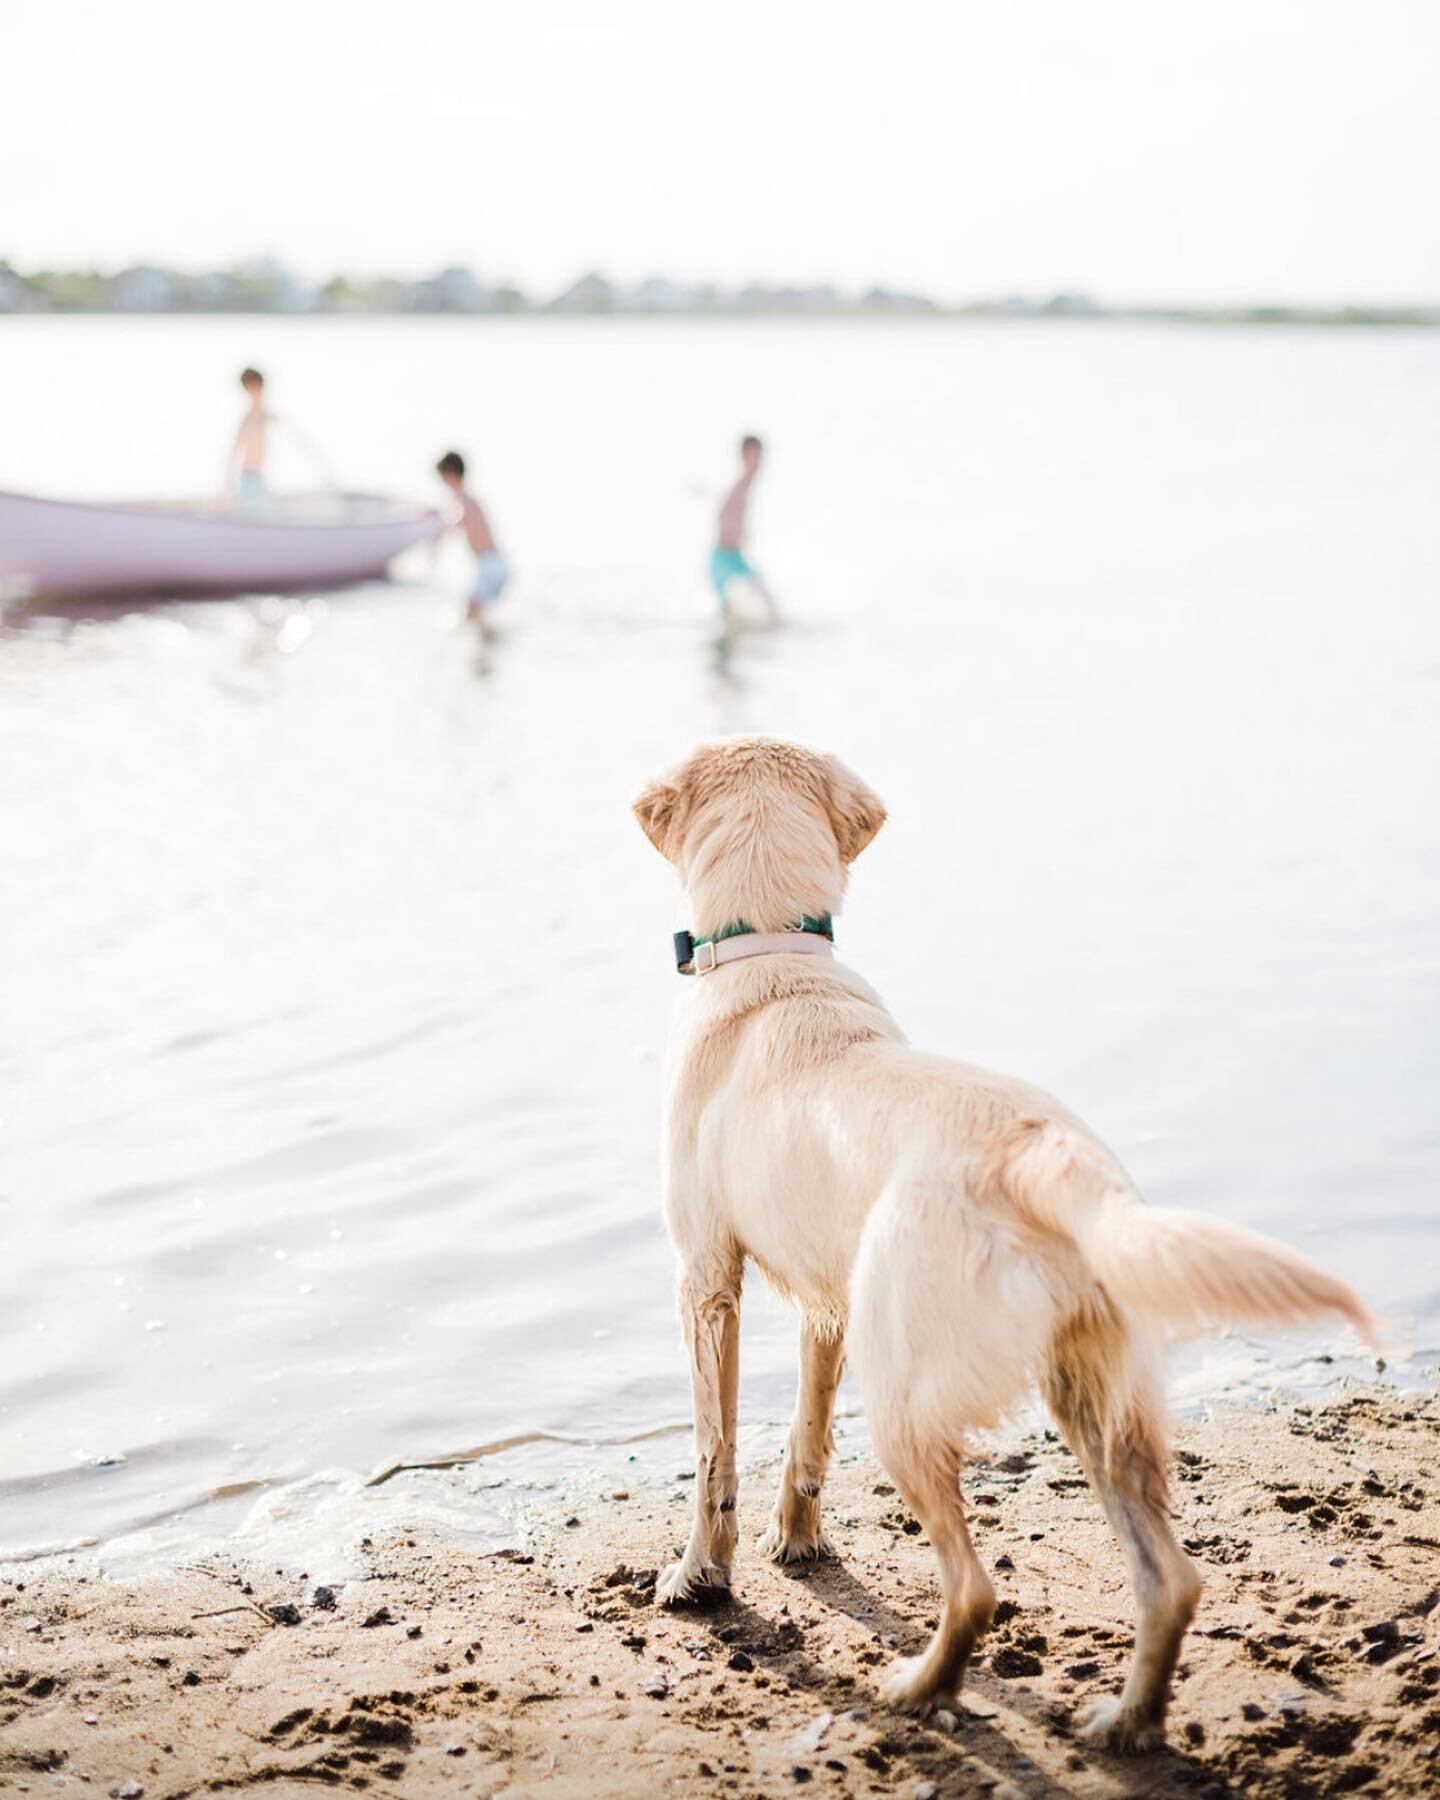 Did you know that we have a selection of dog friendly houses!? The Red Plum, Beach Cottage, Lane of Gold, and Sunset views will allow for 4 legged friends to join you!  We are already booking for next summer if you want to snag your week early!  Phot